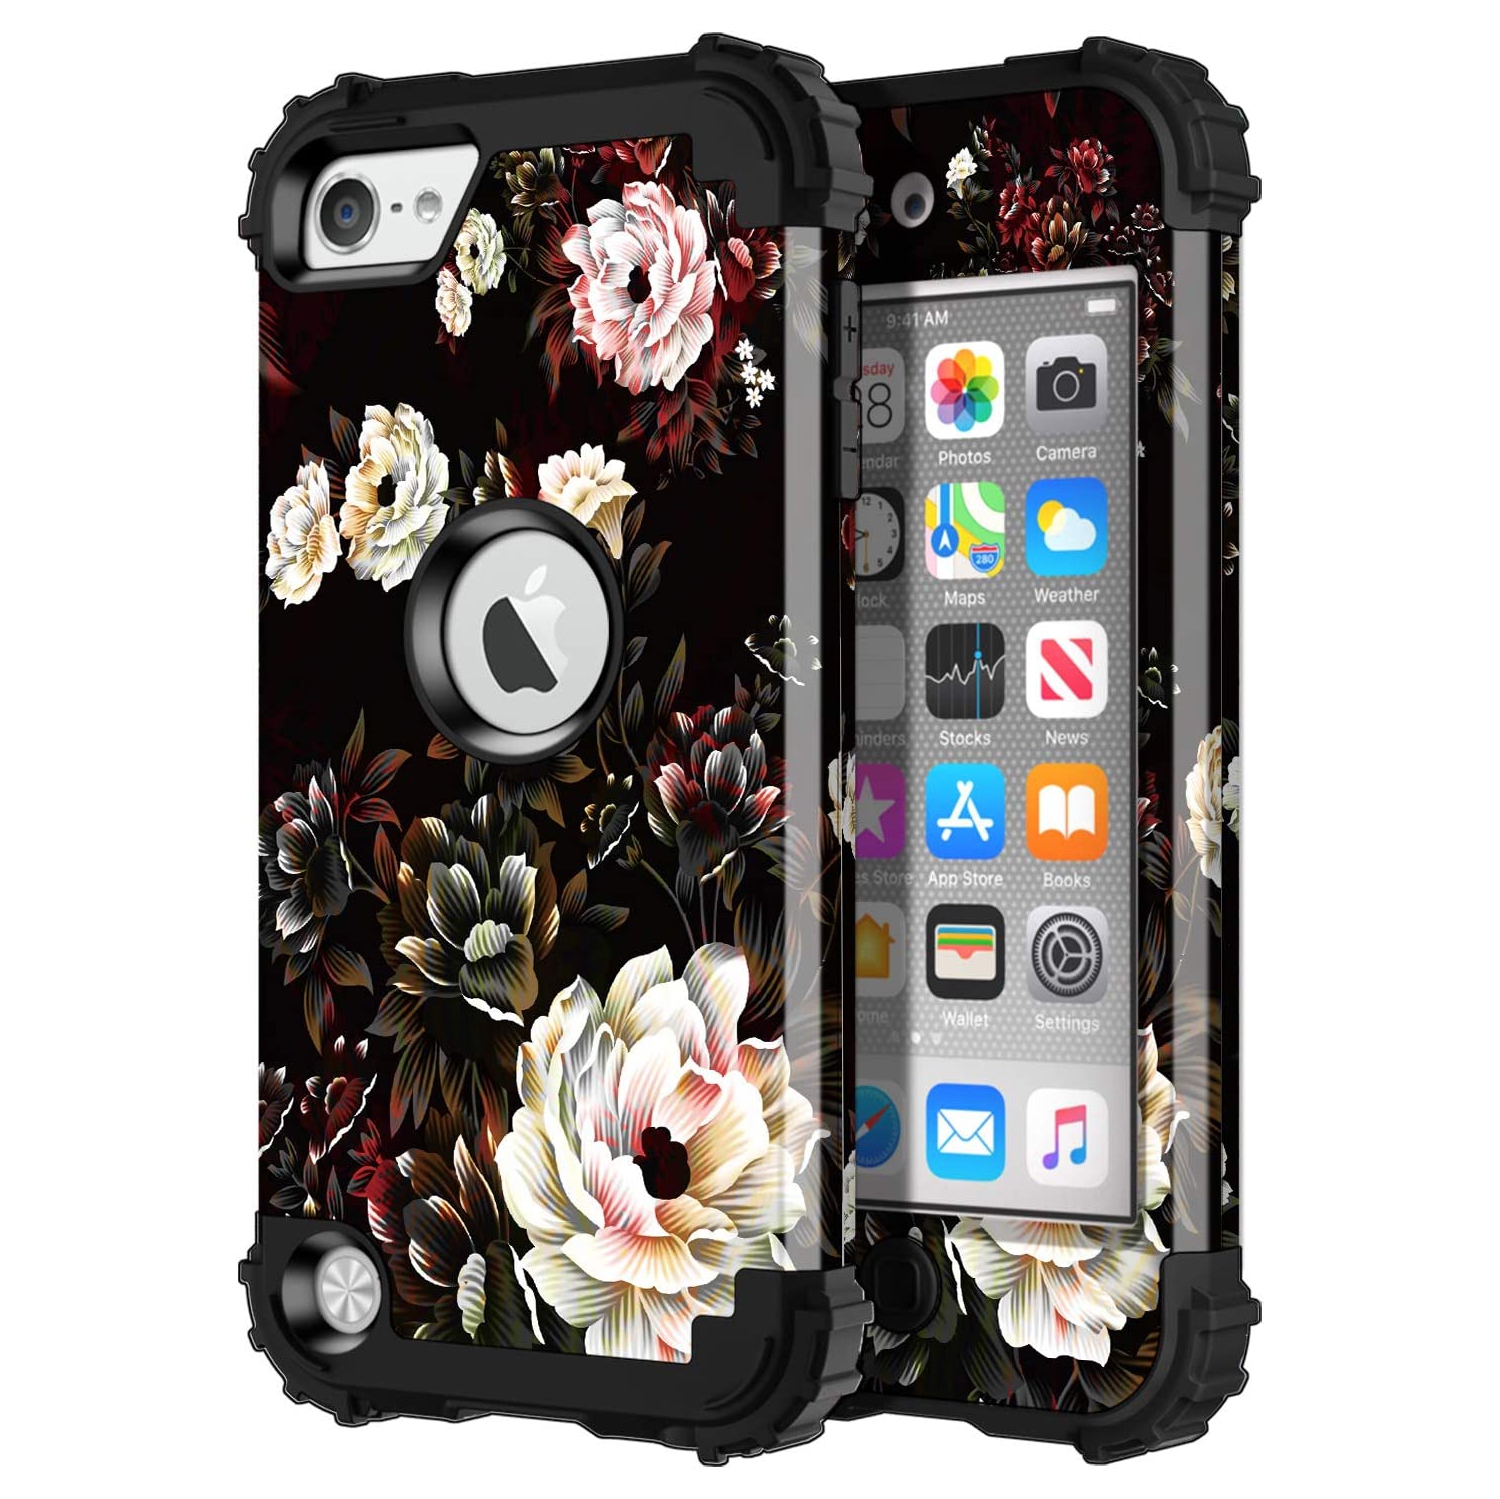 iPod Touch 7 2019 Case, for iPod Touch 6/5 Case Floral 3 in 1 Heavy Duty Hybrid Sturdy High Impact Shockproof Cover Case for Apple iPod Touch 7th/6th/5th Generation, White Flower